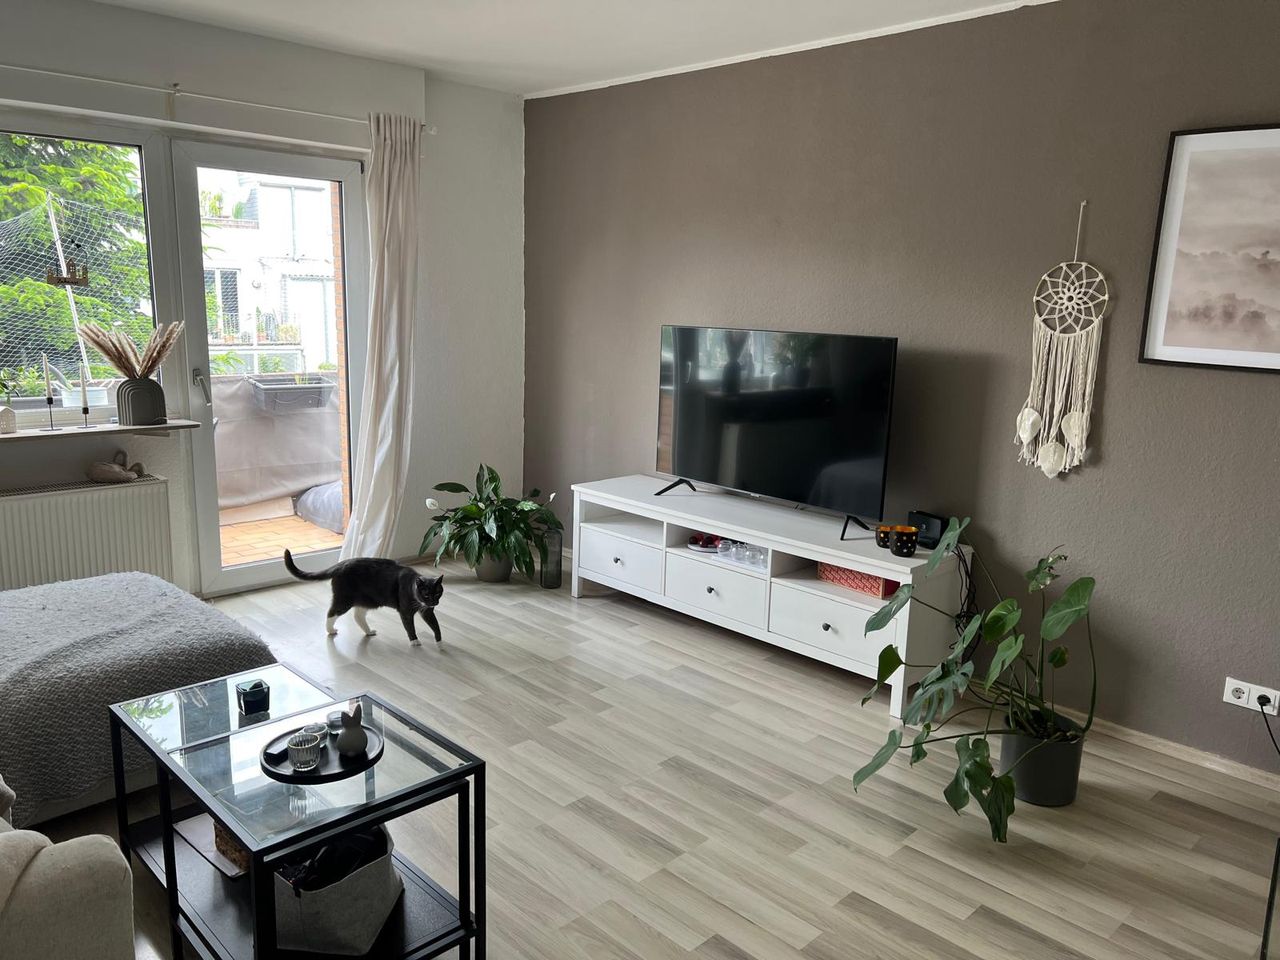 Charming 2-room flat for rent in the heart of Troisdorf Spich!